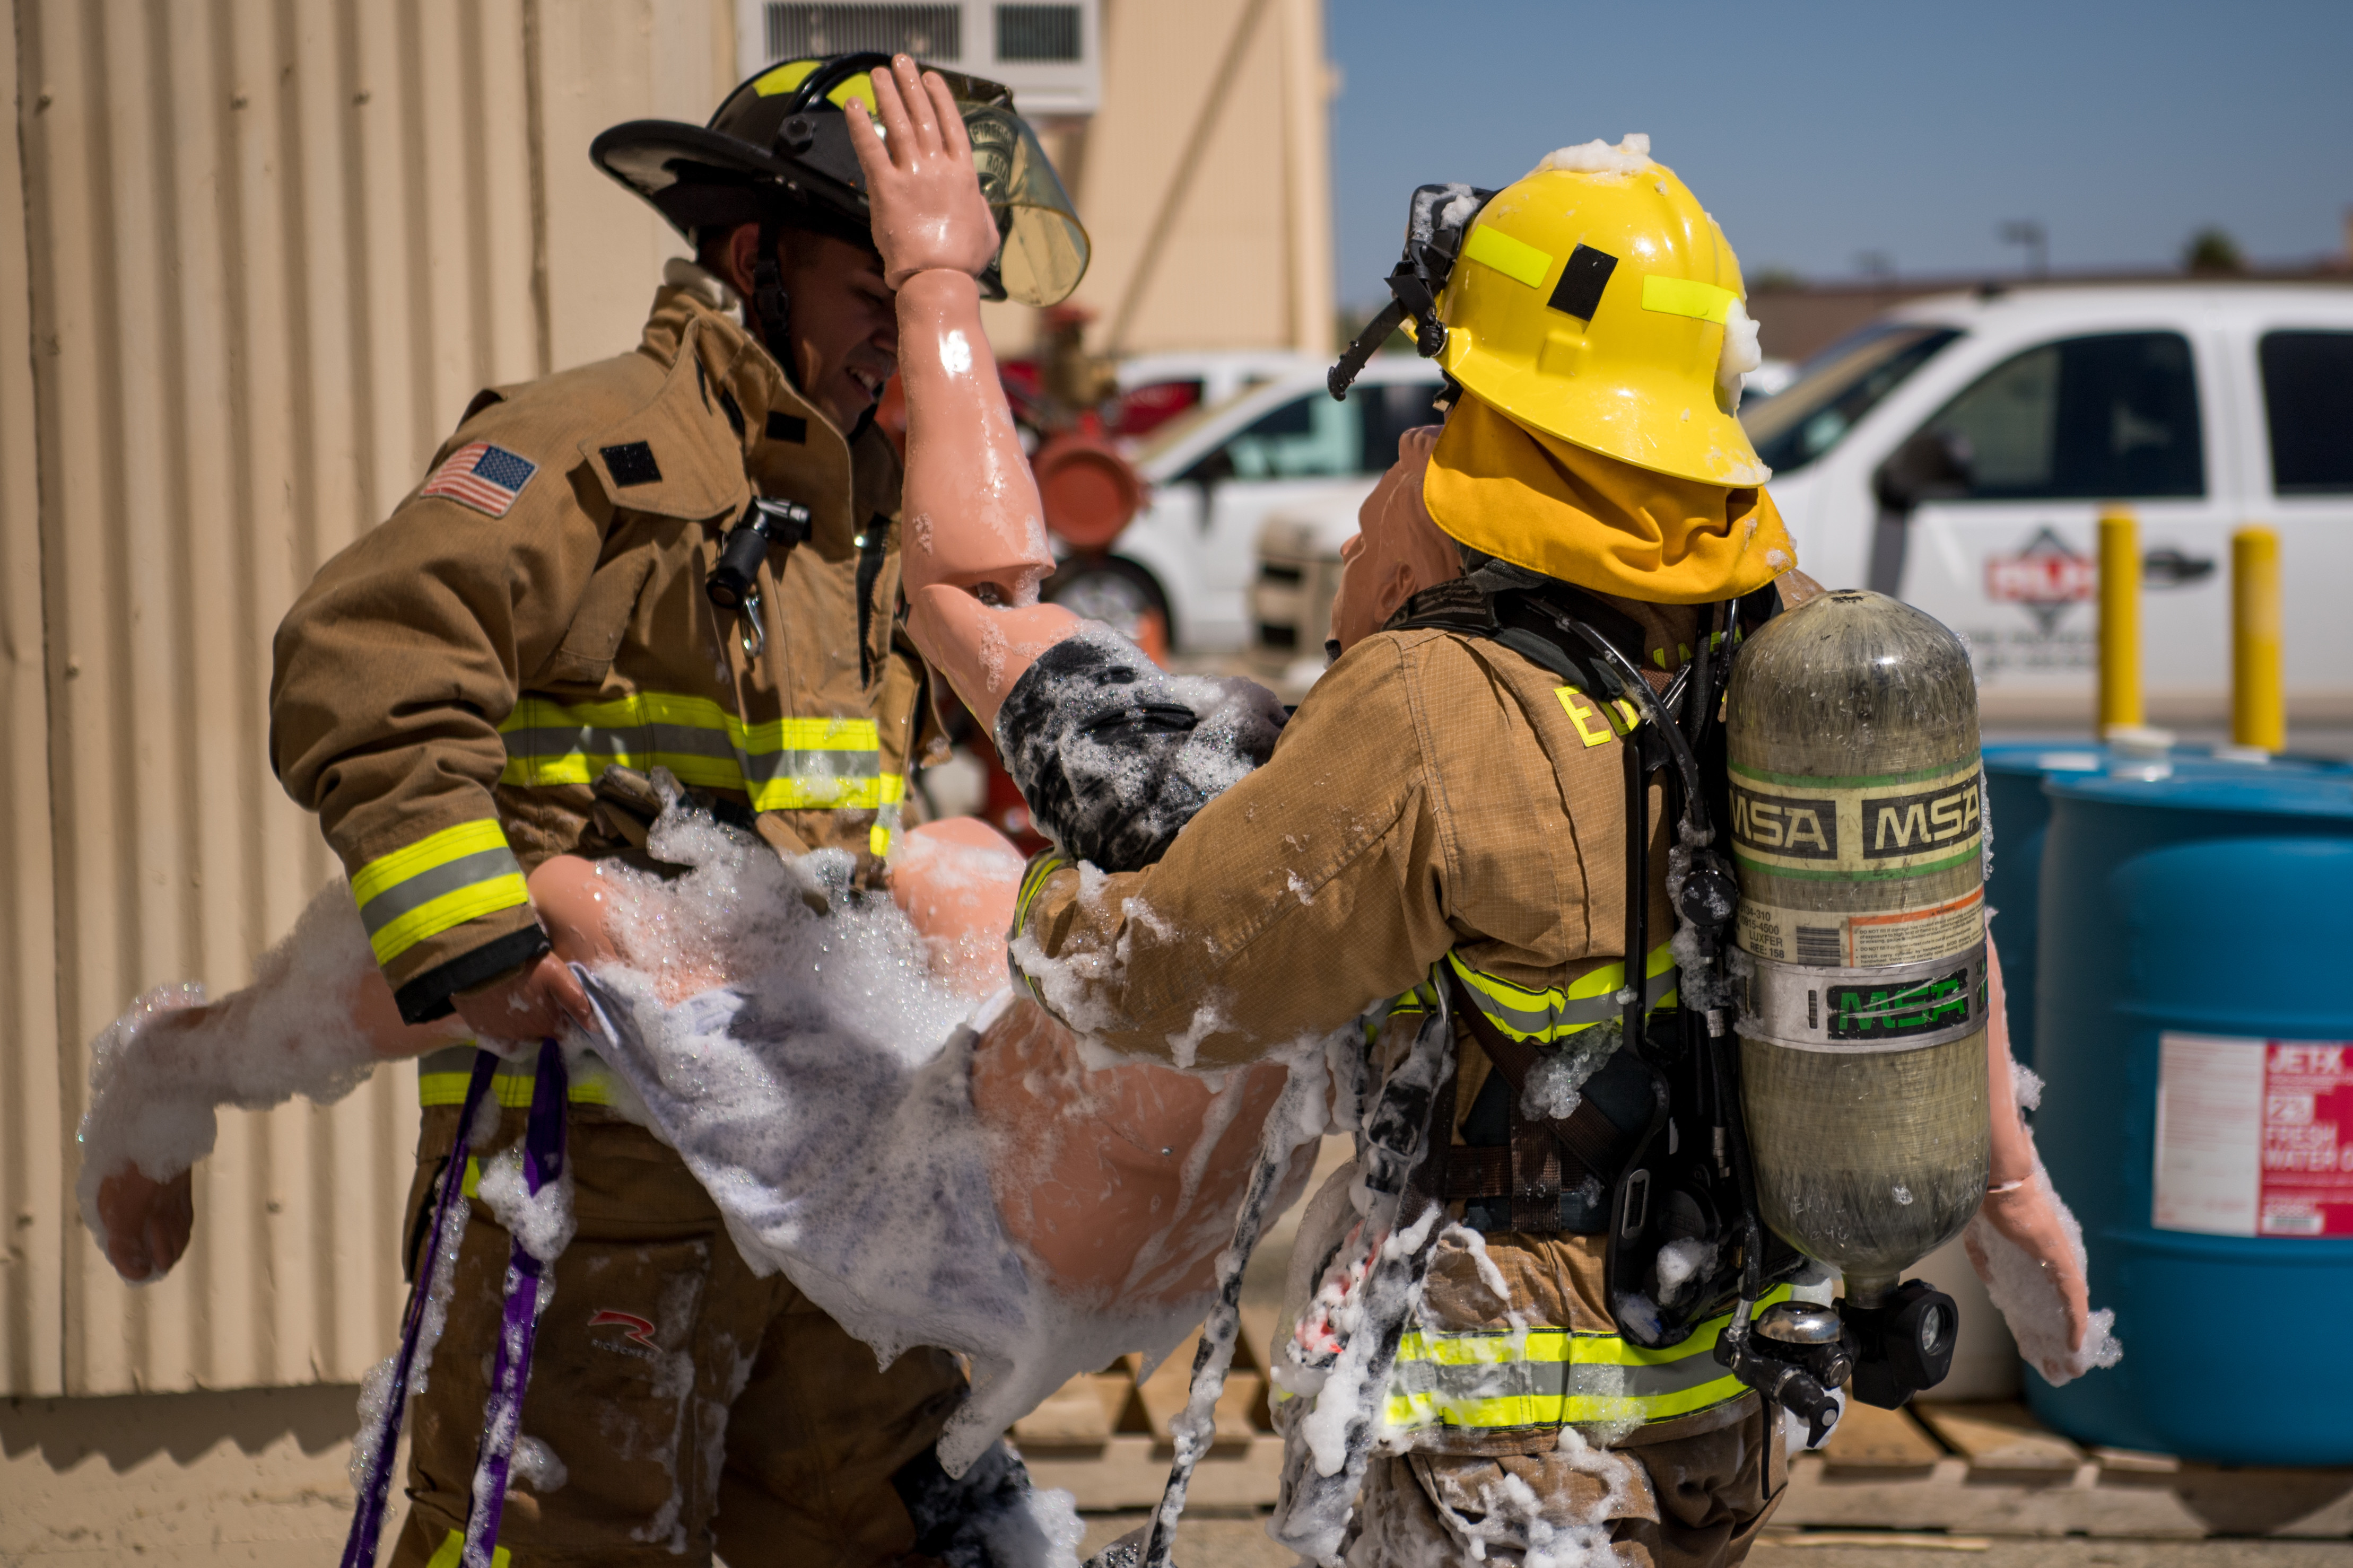 edwards-afb-firefighters-conduct-search-and-rescue-training-during-foam-test-air-force-life